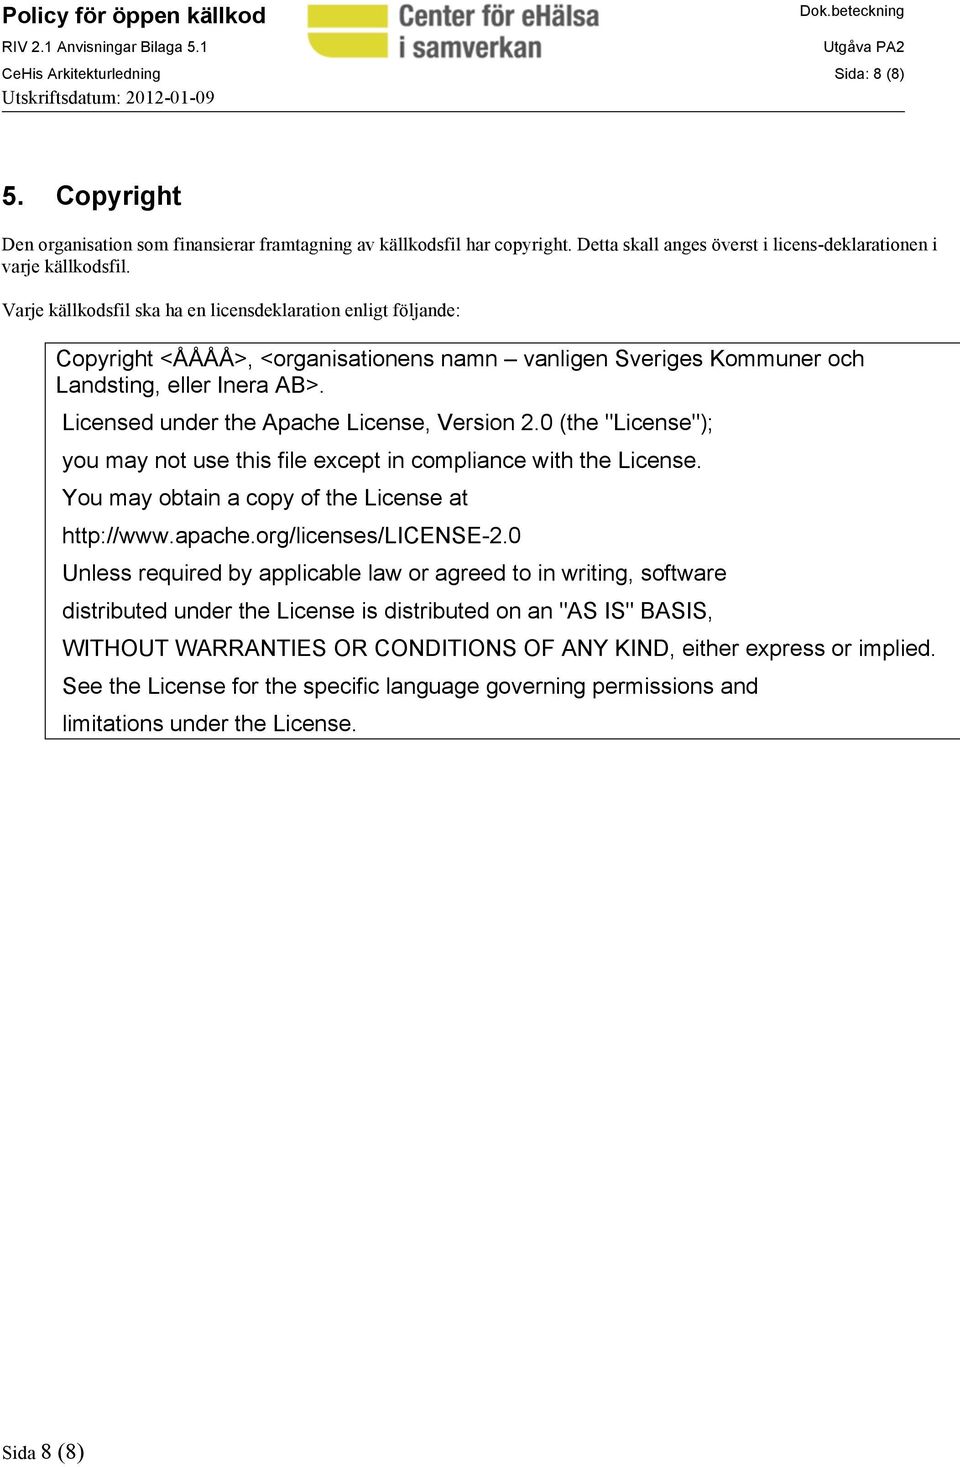 Licensed under the Apache License, Version 2.0 (the "License"); you may not use this file except in compliance with the License. You may obtain a copy of the License at http://www.apache.